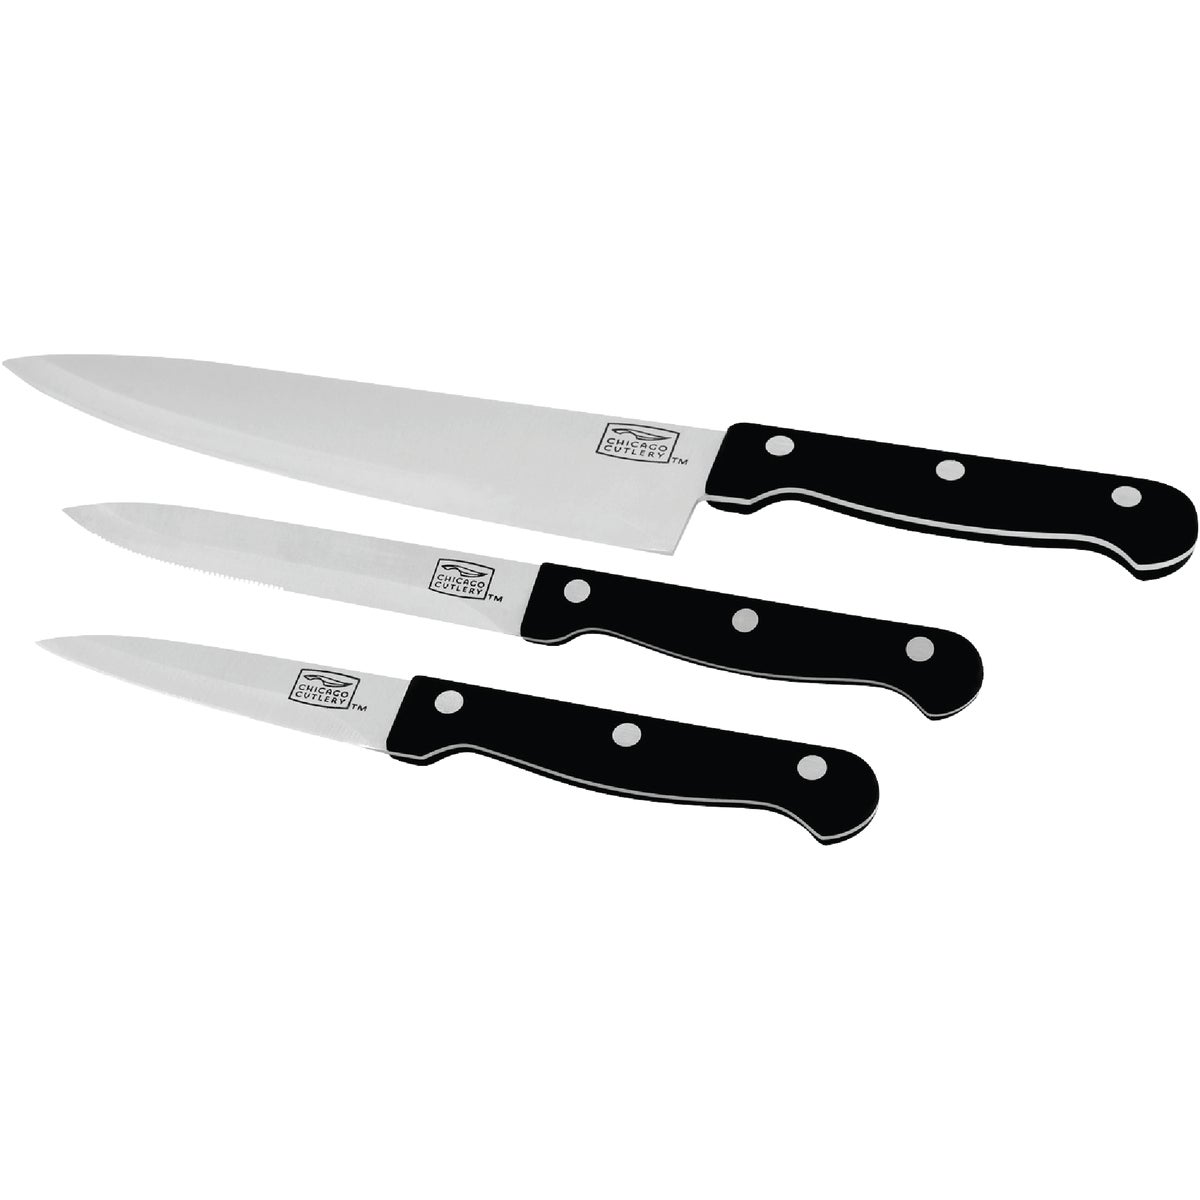 Item 624454, The Essentials 3-piece set includes a basic set of knives needed for 